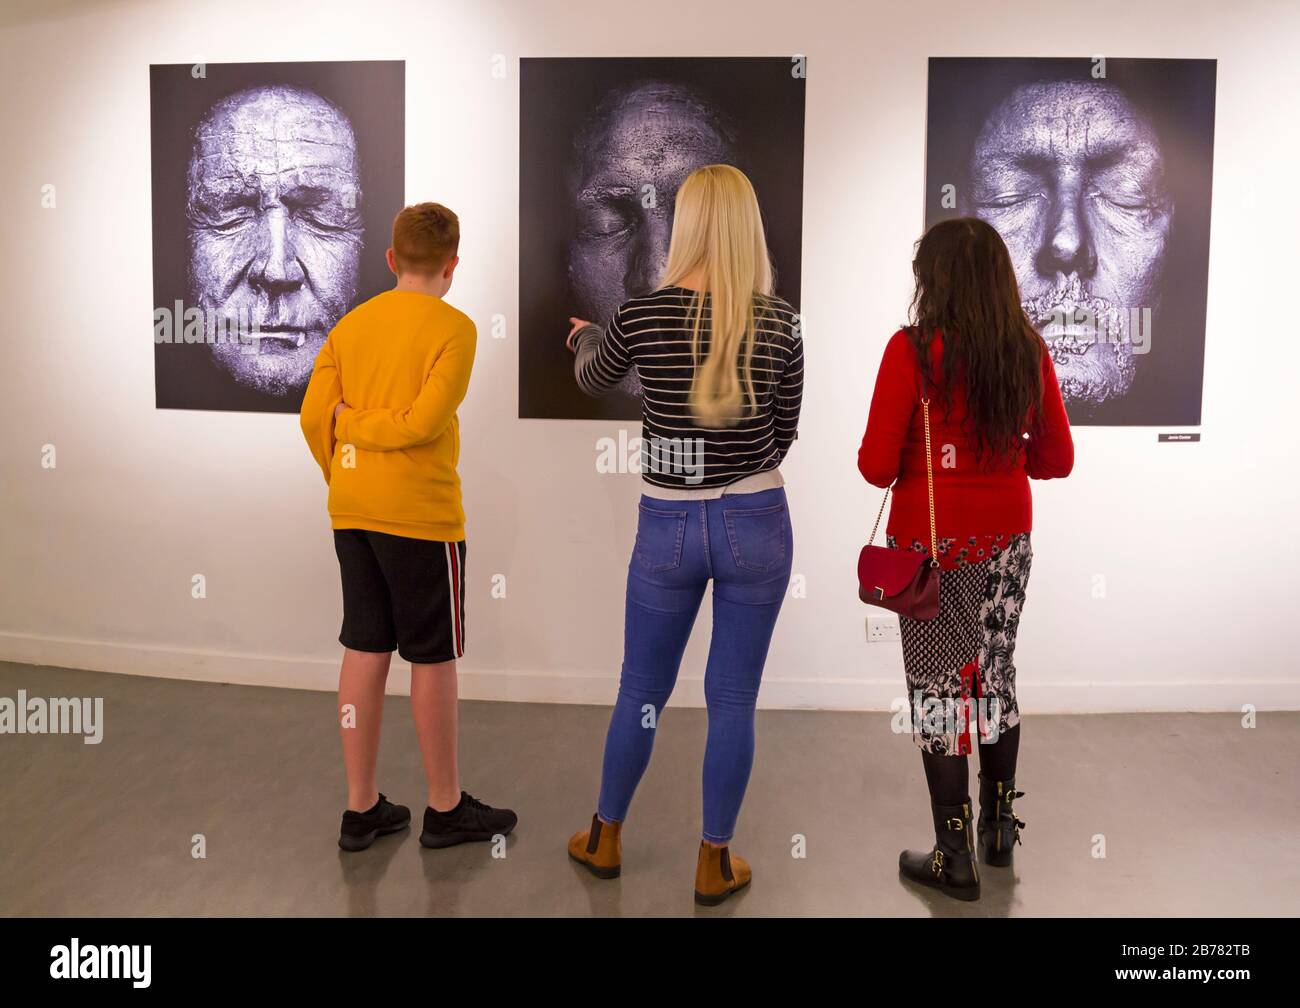 Poole, Dorset, UK.  14th March 2020. Opening of ALIVE: IN THE FACE OF DEATH exhibition of photographs by Rankin in collaboration with Forest Holme Hospice Charity in Poole. Rankin sets out to explore and challenge our perceptions of death, portraying stories of those touched by death, a celebration of life and diversity rather than focusing on death itself. It features a series of haunting monochrome ‘life mask’ portraits of casts made from the faces of famous celebrities and colourful masks echoing the Mexican Day of the Dead celebrations. Credit: Carolyn Jenkins/Alamy Live News Stock Photo